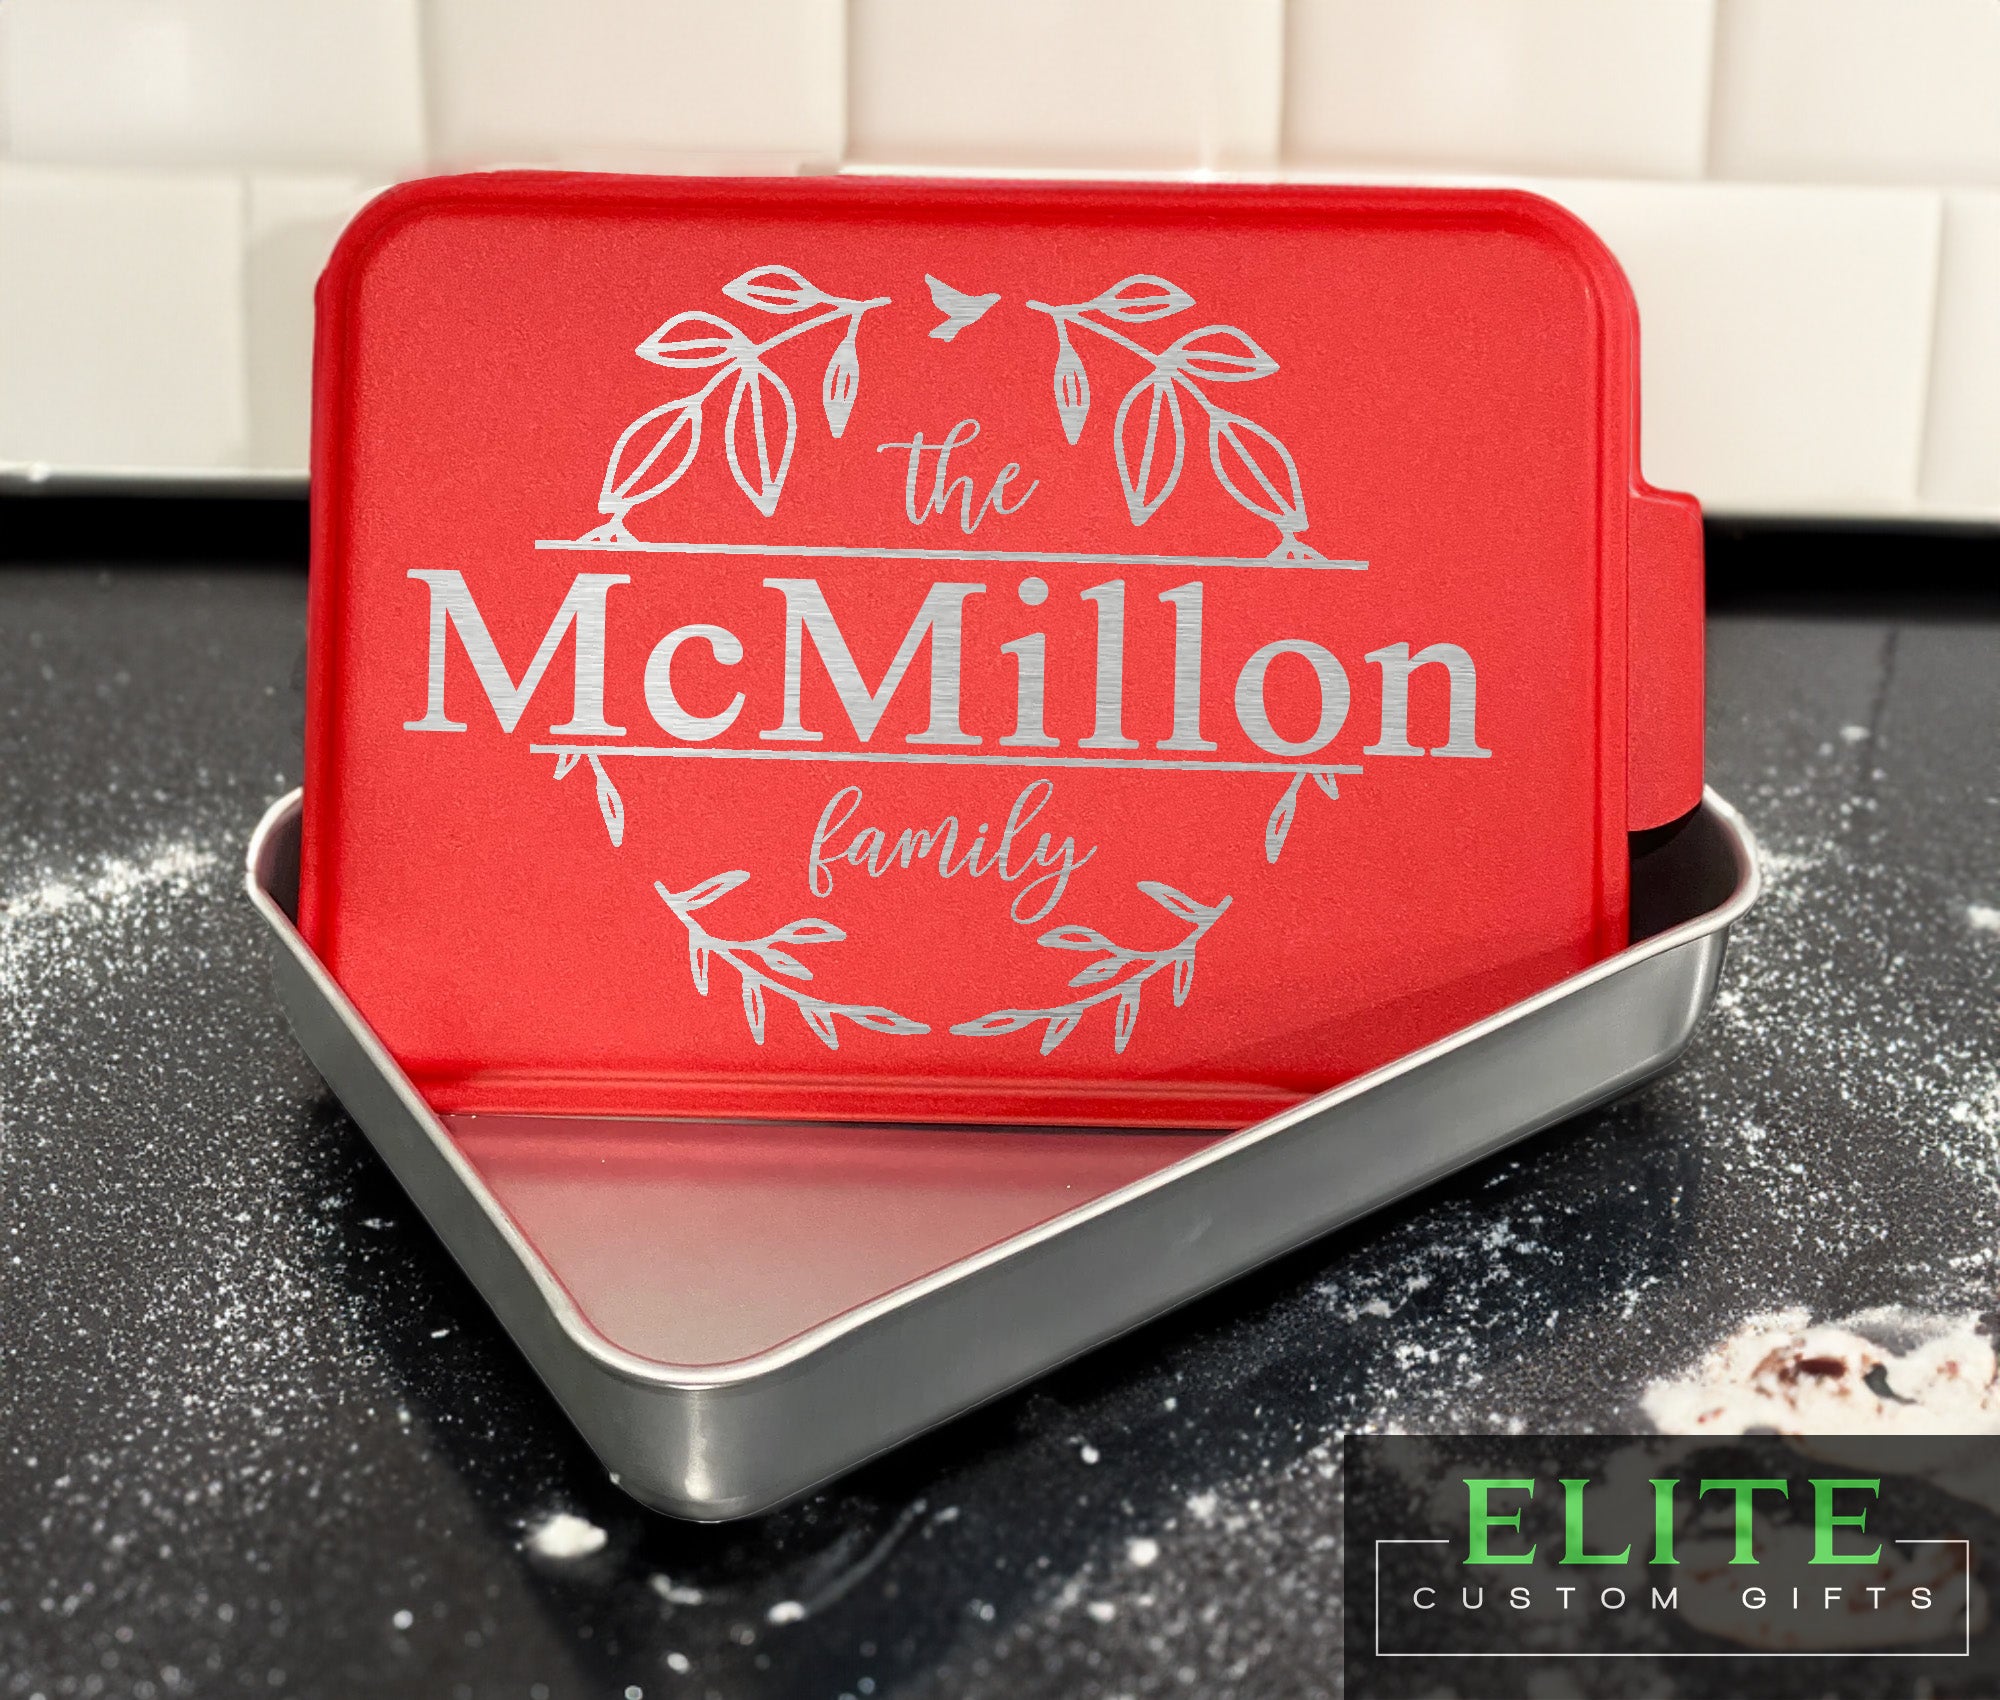 The Family Engraved Cake Pan